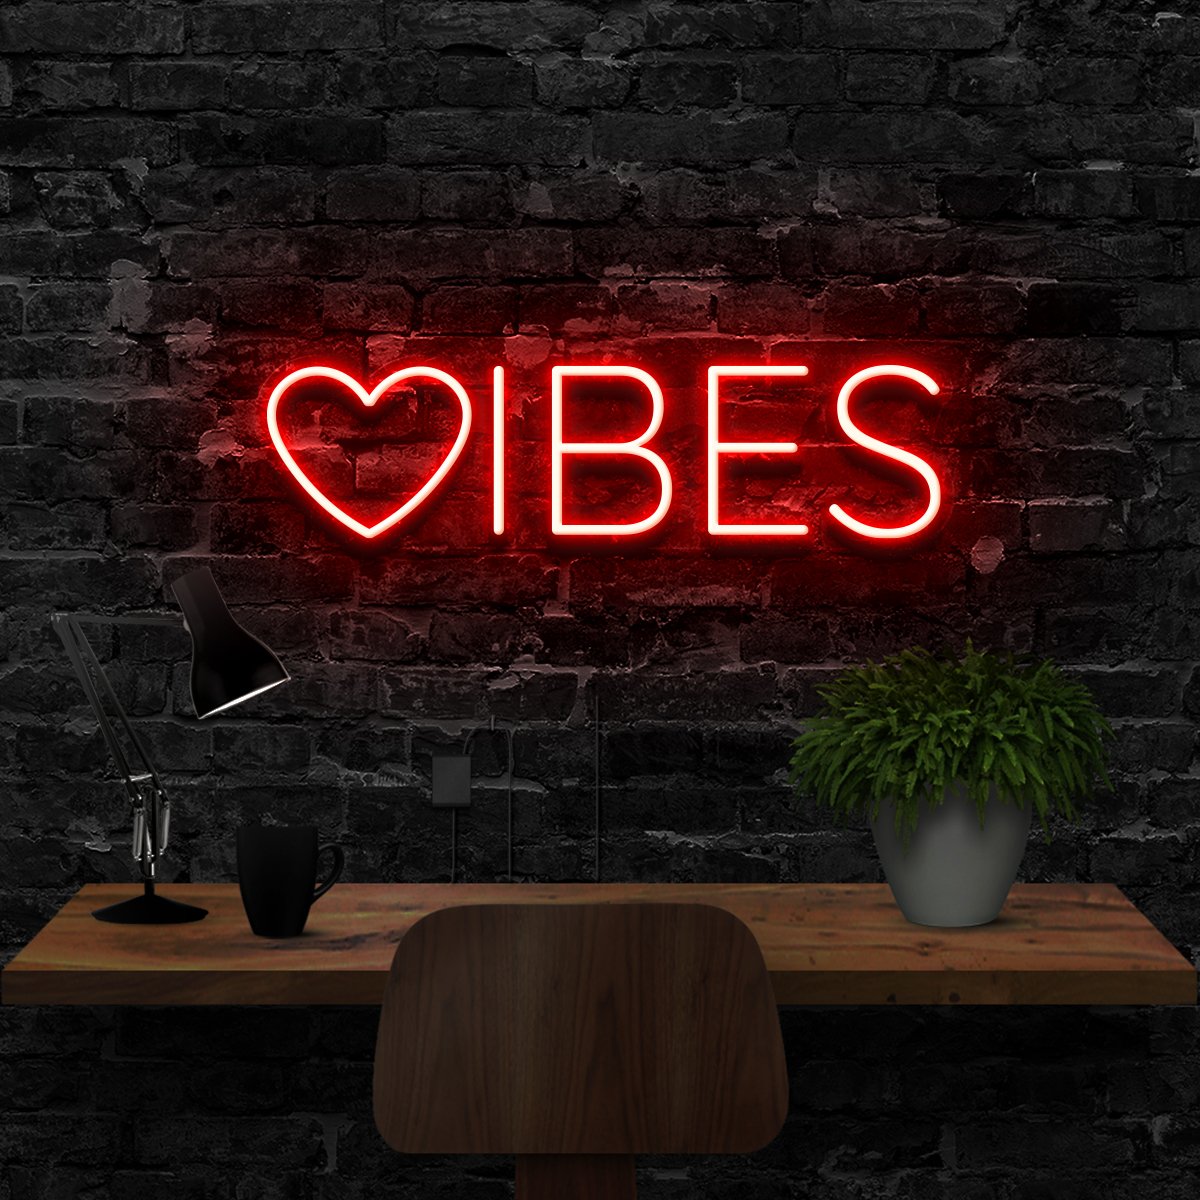 "VIBES" Neon Sign 40cm (1.3ft) / Red / LED Neon by Neon Icons